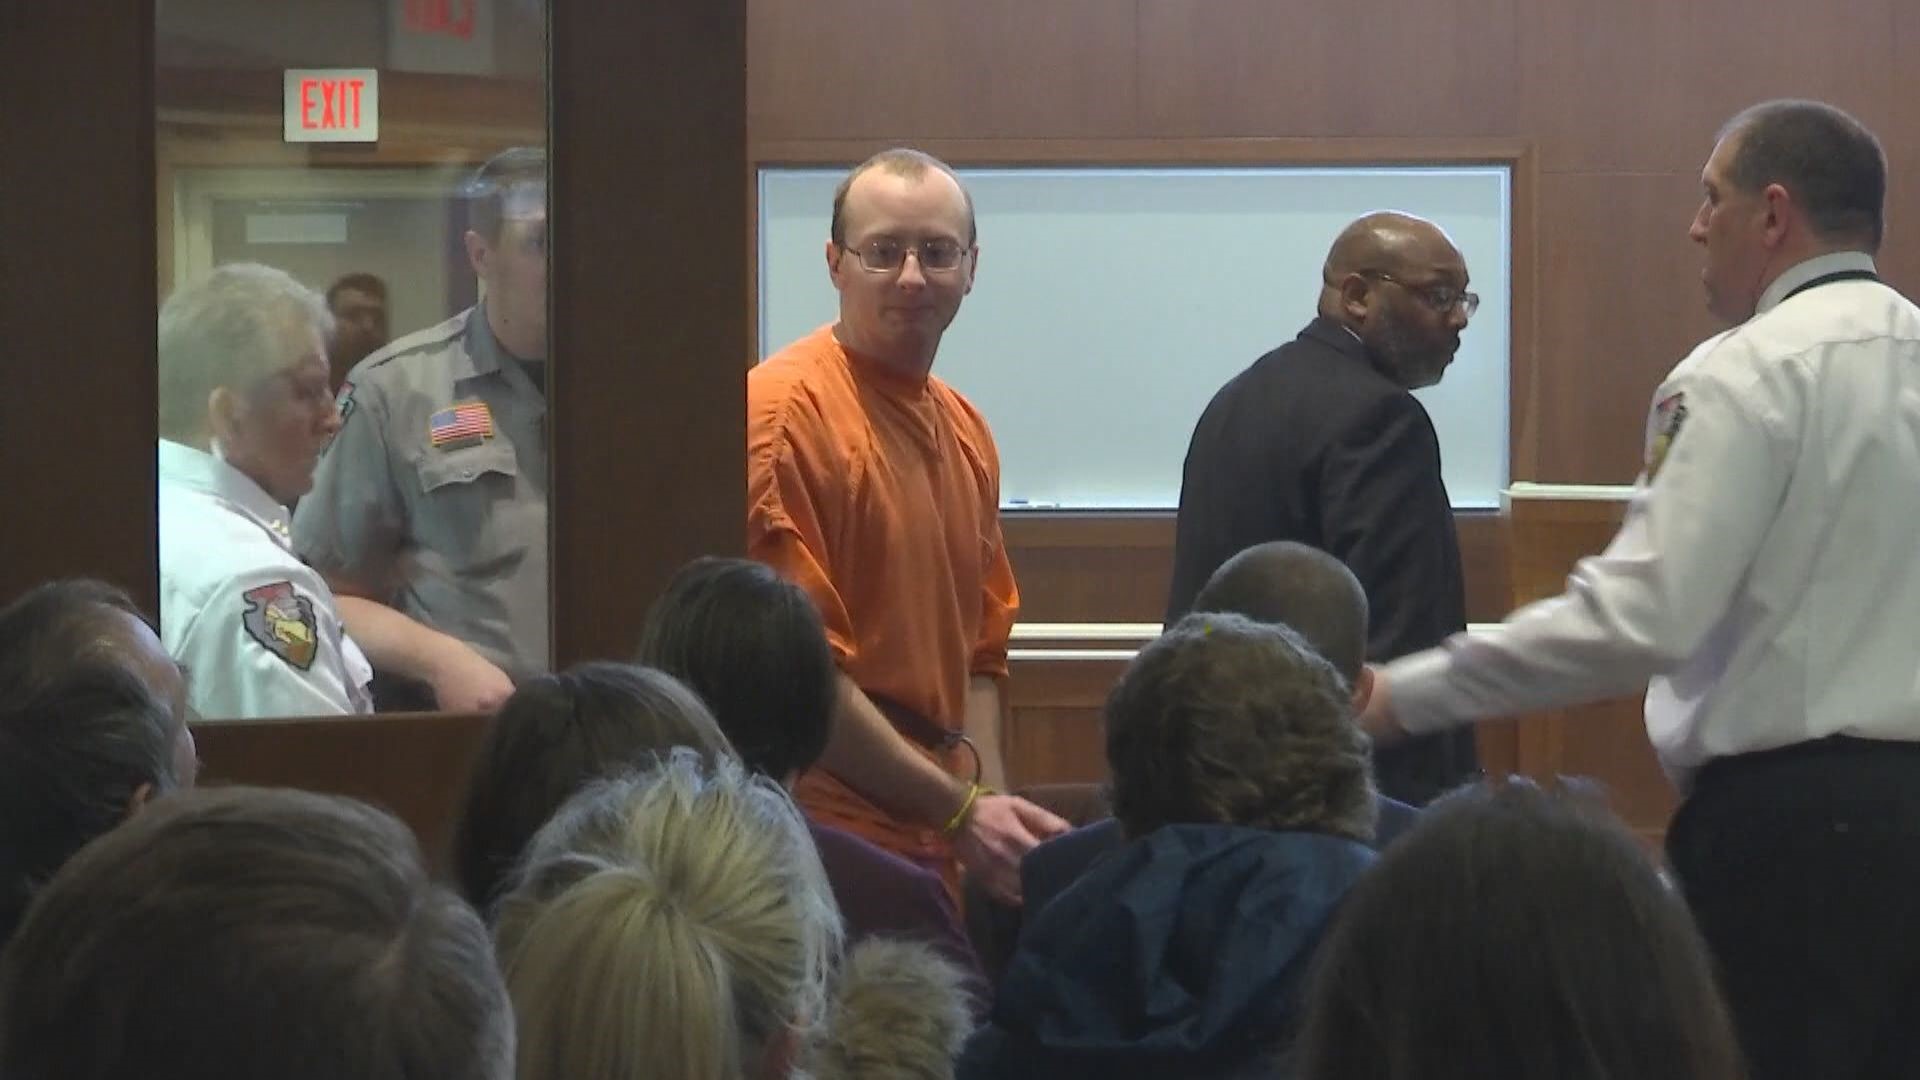 Jake Patterson waived his right to preliminary hearing in the Jayme Closs case. His arraignment has been set for March 27.